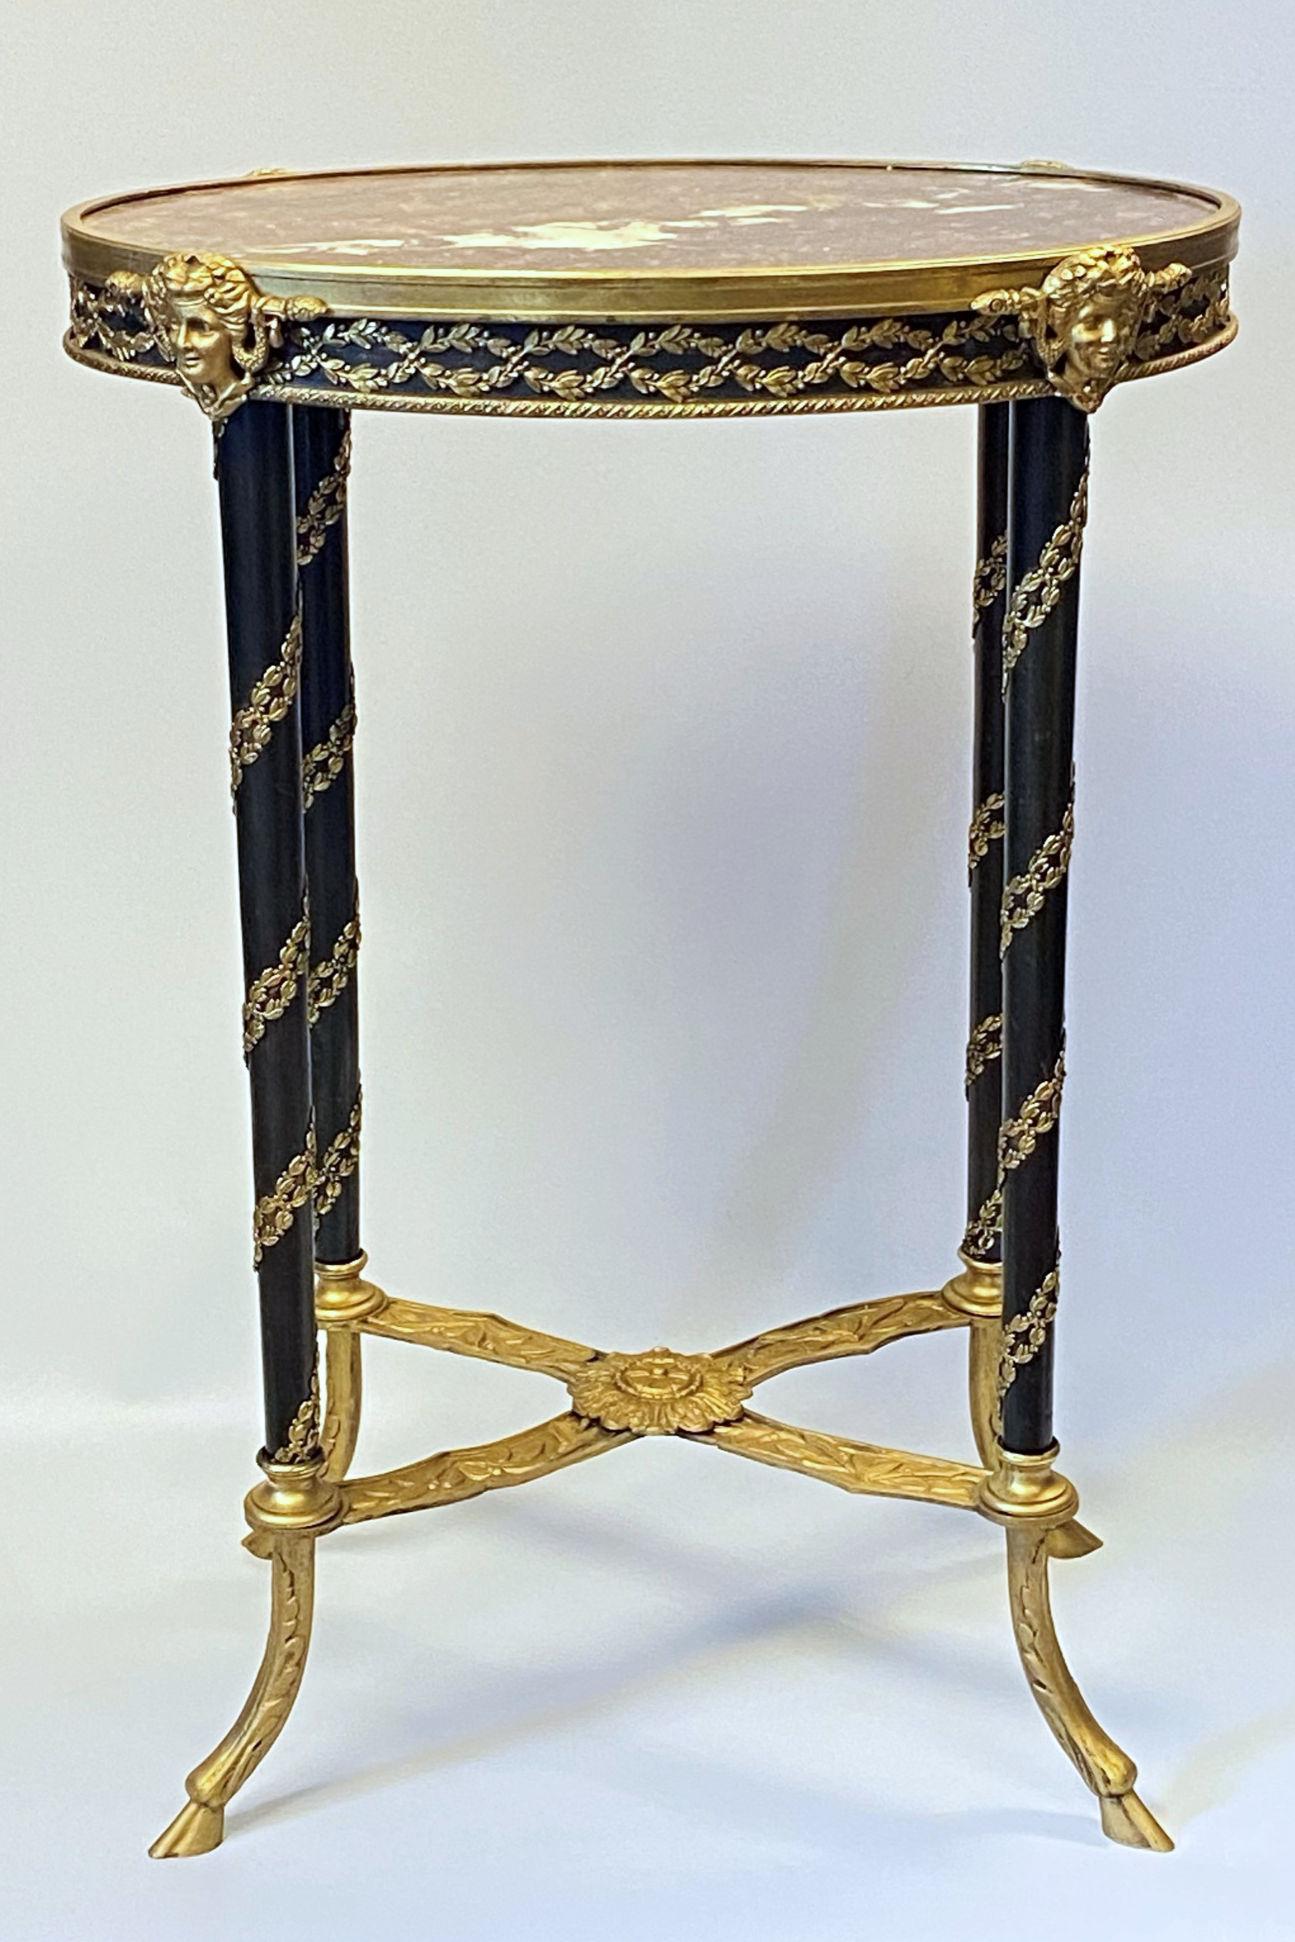 Gilt bronze and marble side table in Louis XVI style.